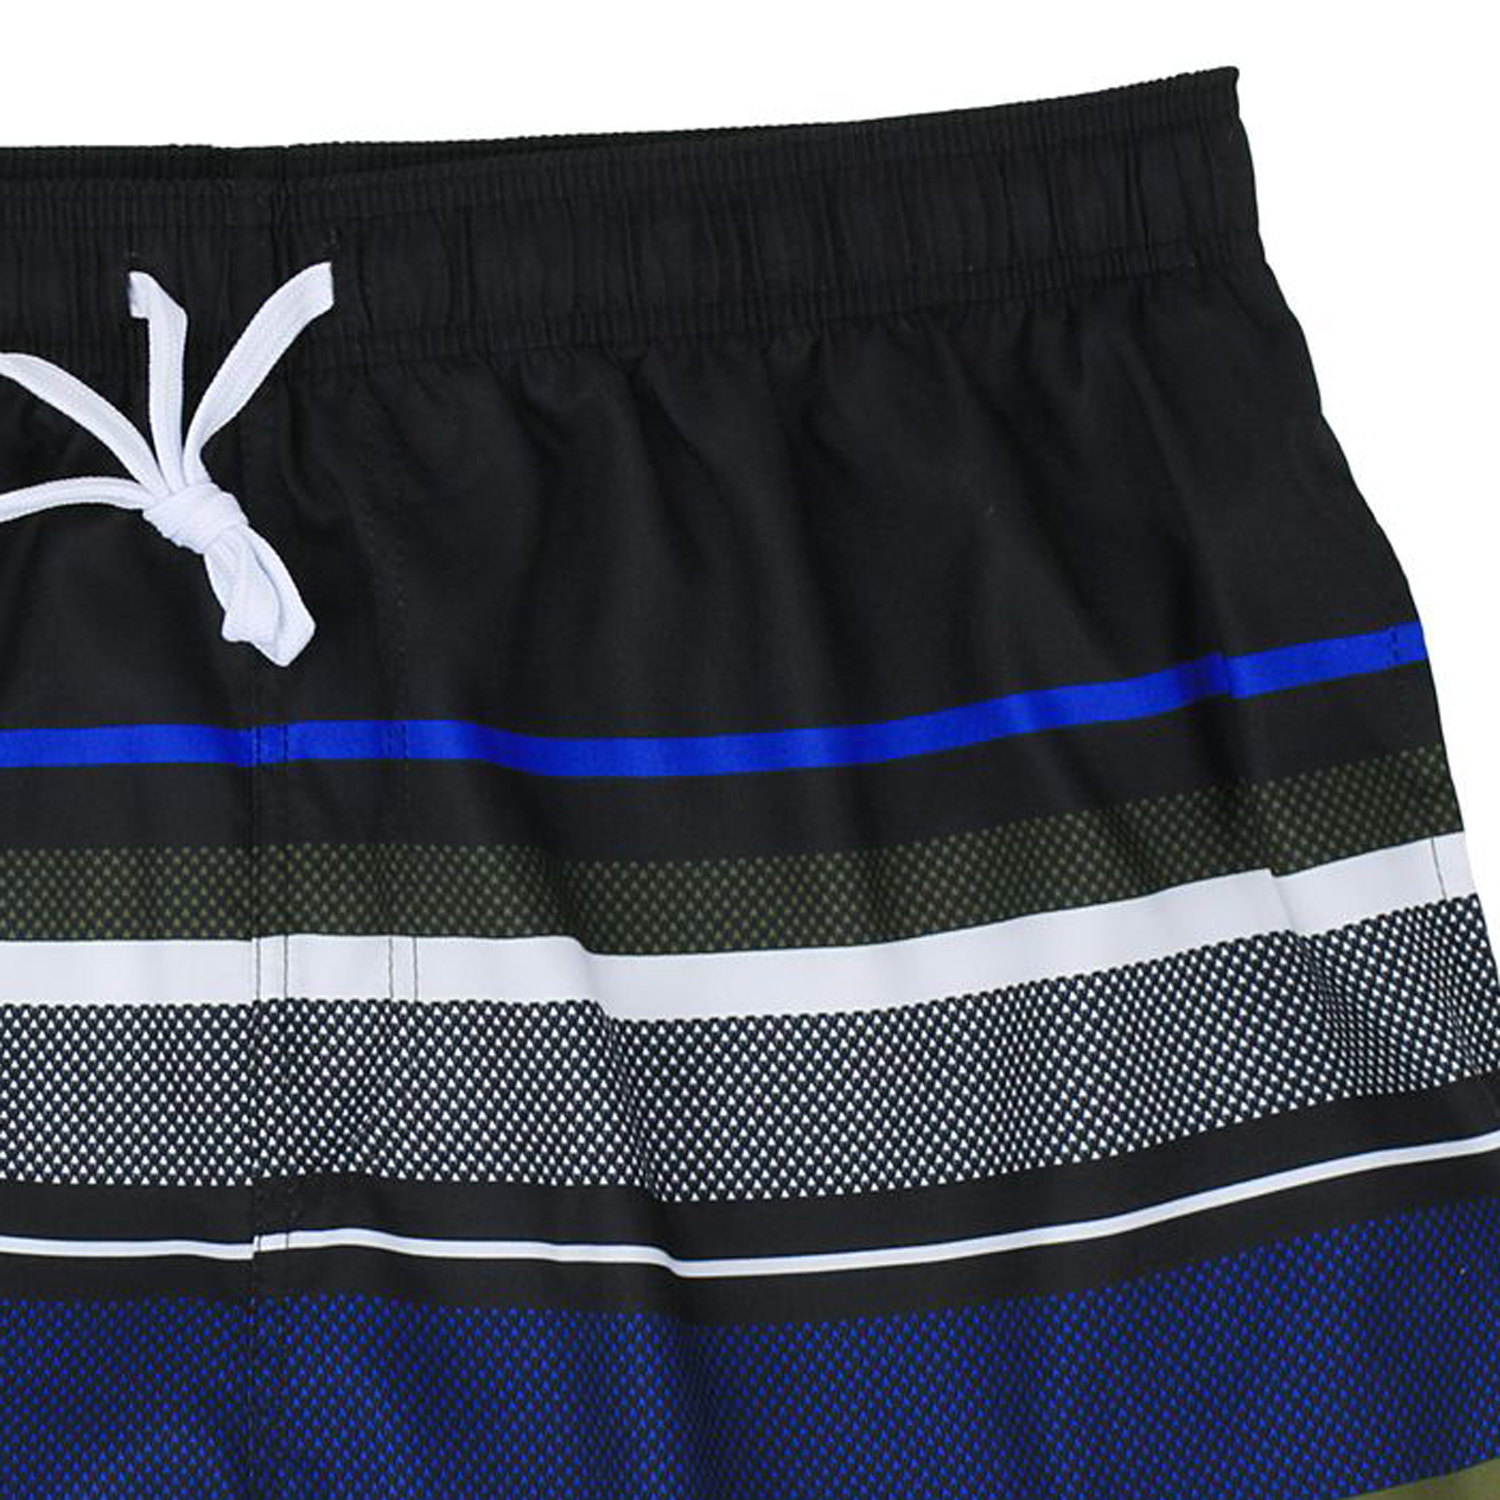 Swimming trunks by Wavebreaker up to oversize 8XL/ black-blue-olive green- white striped